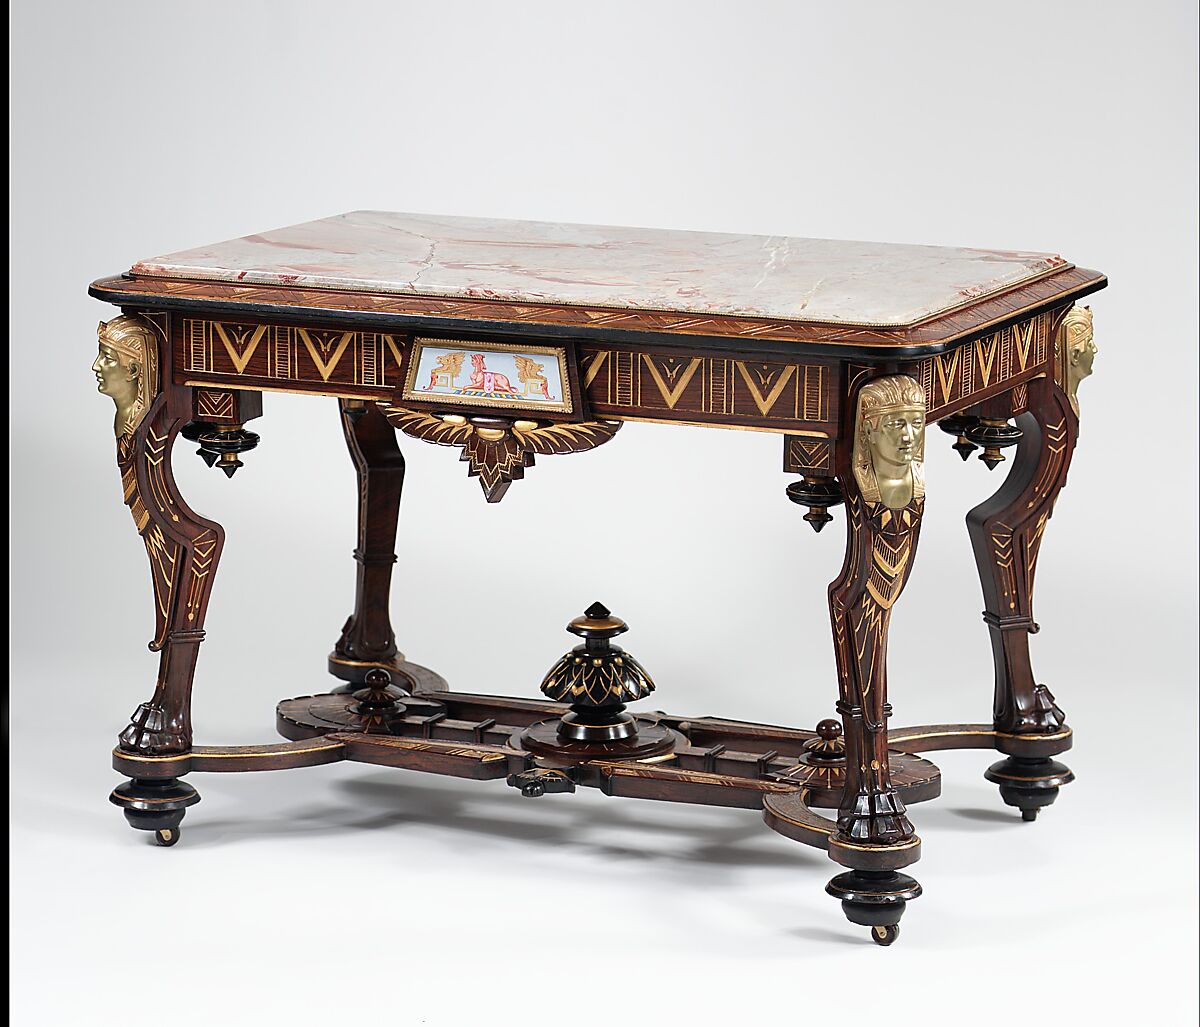 Center Table, Attributed to Pottier and Stymus Manufacturing Company (active ca. 1858–1918/19), Rosewood, walnut, gilding, marble, brass, glazed ceramic tile, American 